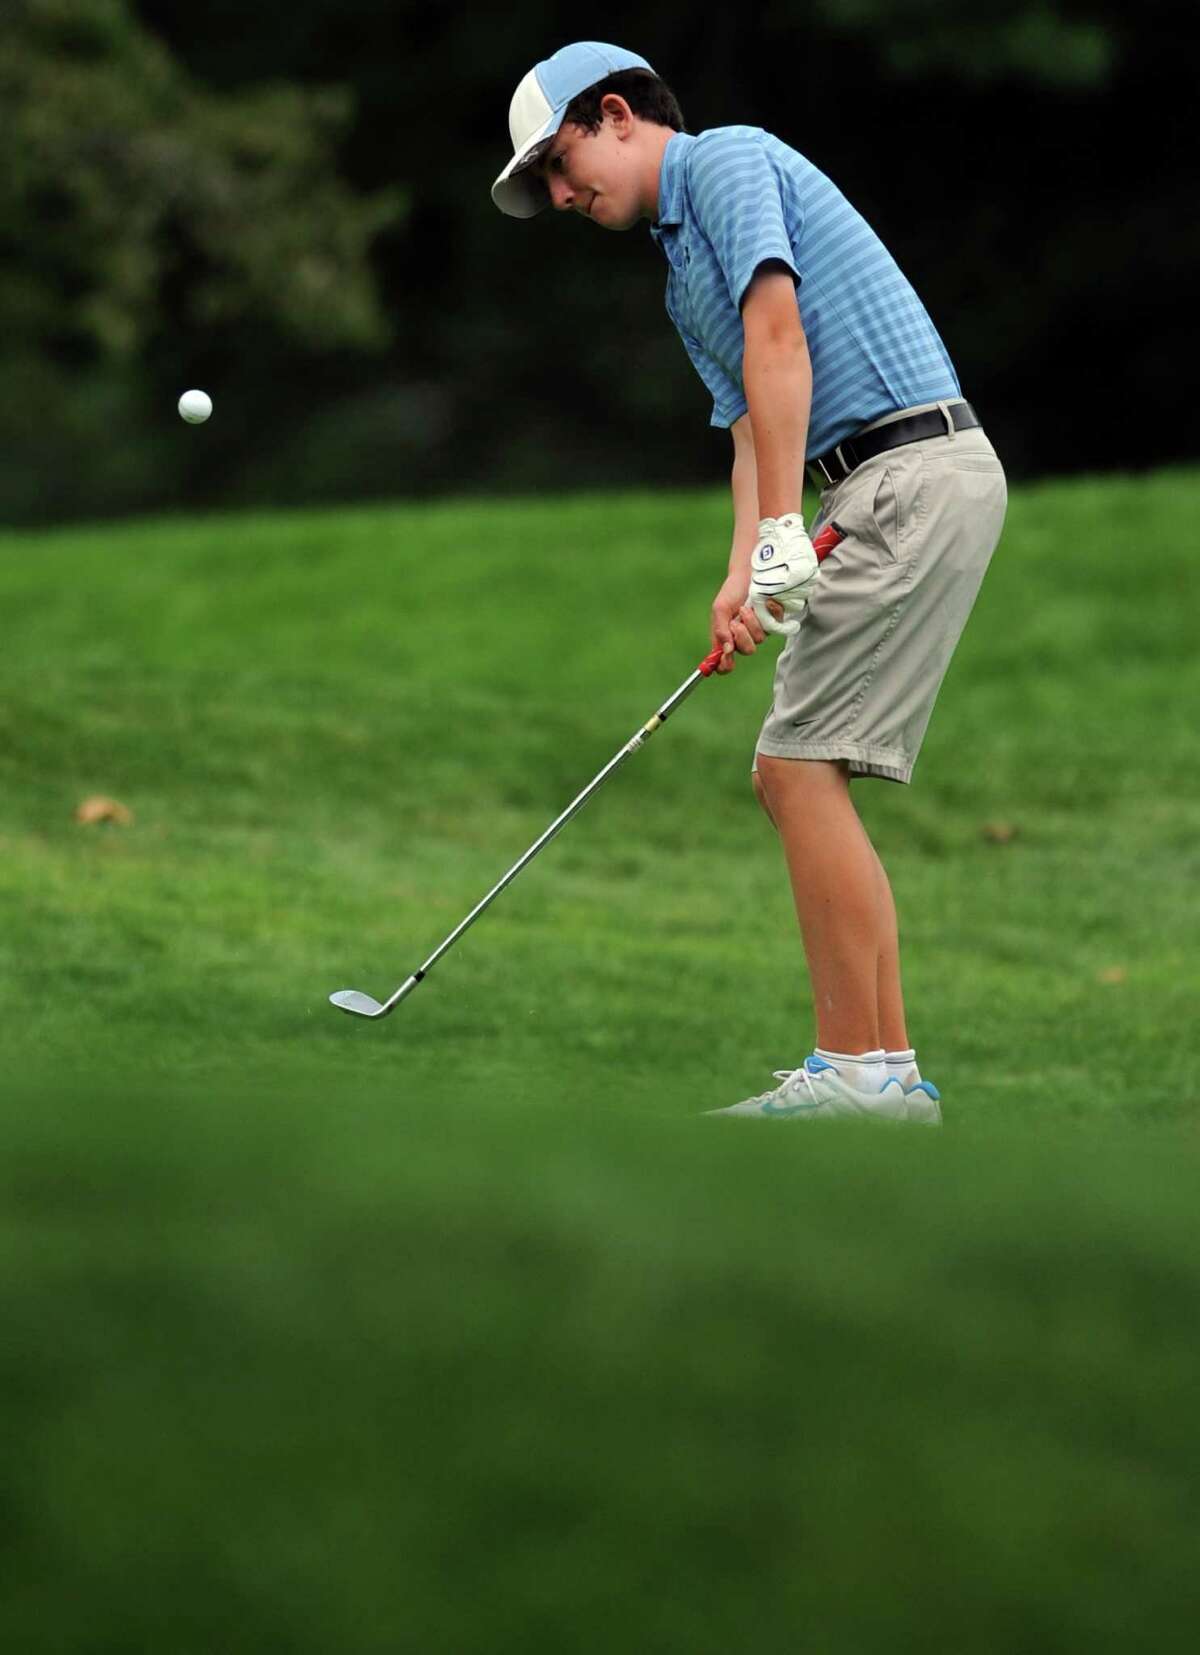 Connor O'Brien, of Norwalk, competes in the Borck Memorial Golf Tournament Wednesday, August 1, 2012 at Mill River Country Club in Stratford, Conn.